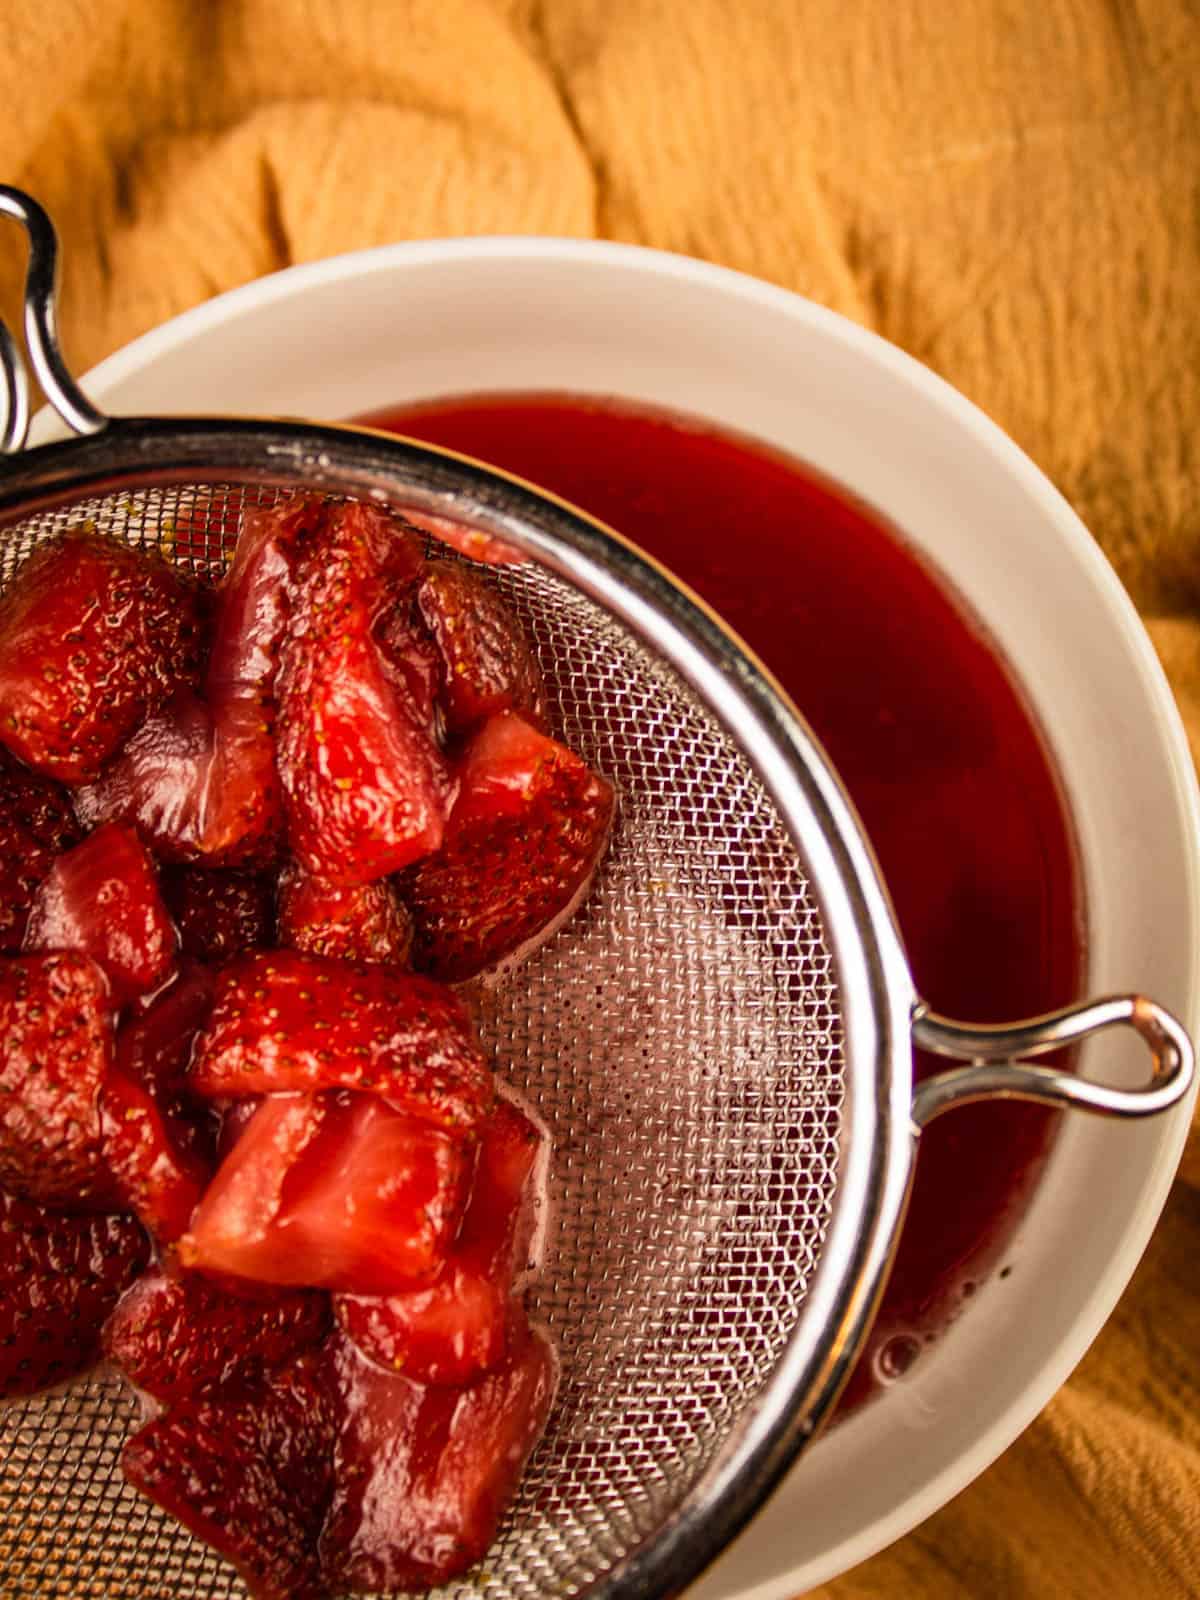 strainer filled with strawberries over a white bowl of red liquid